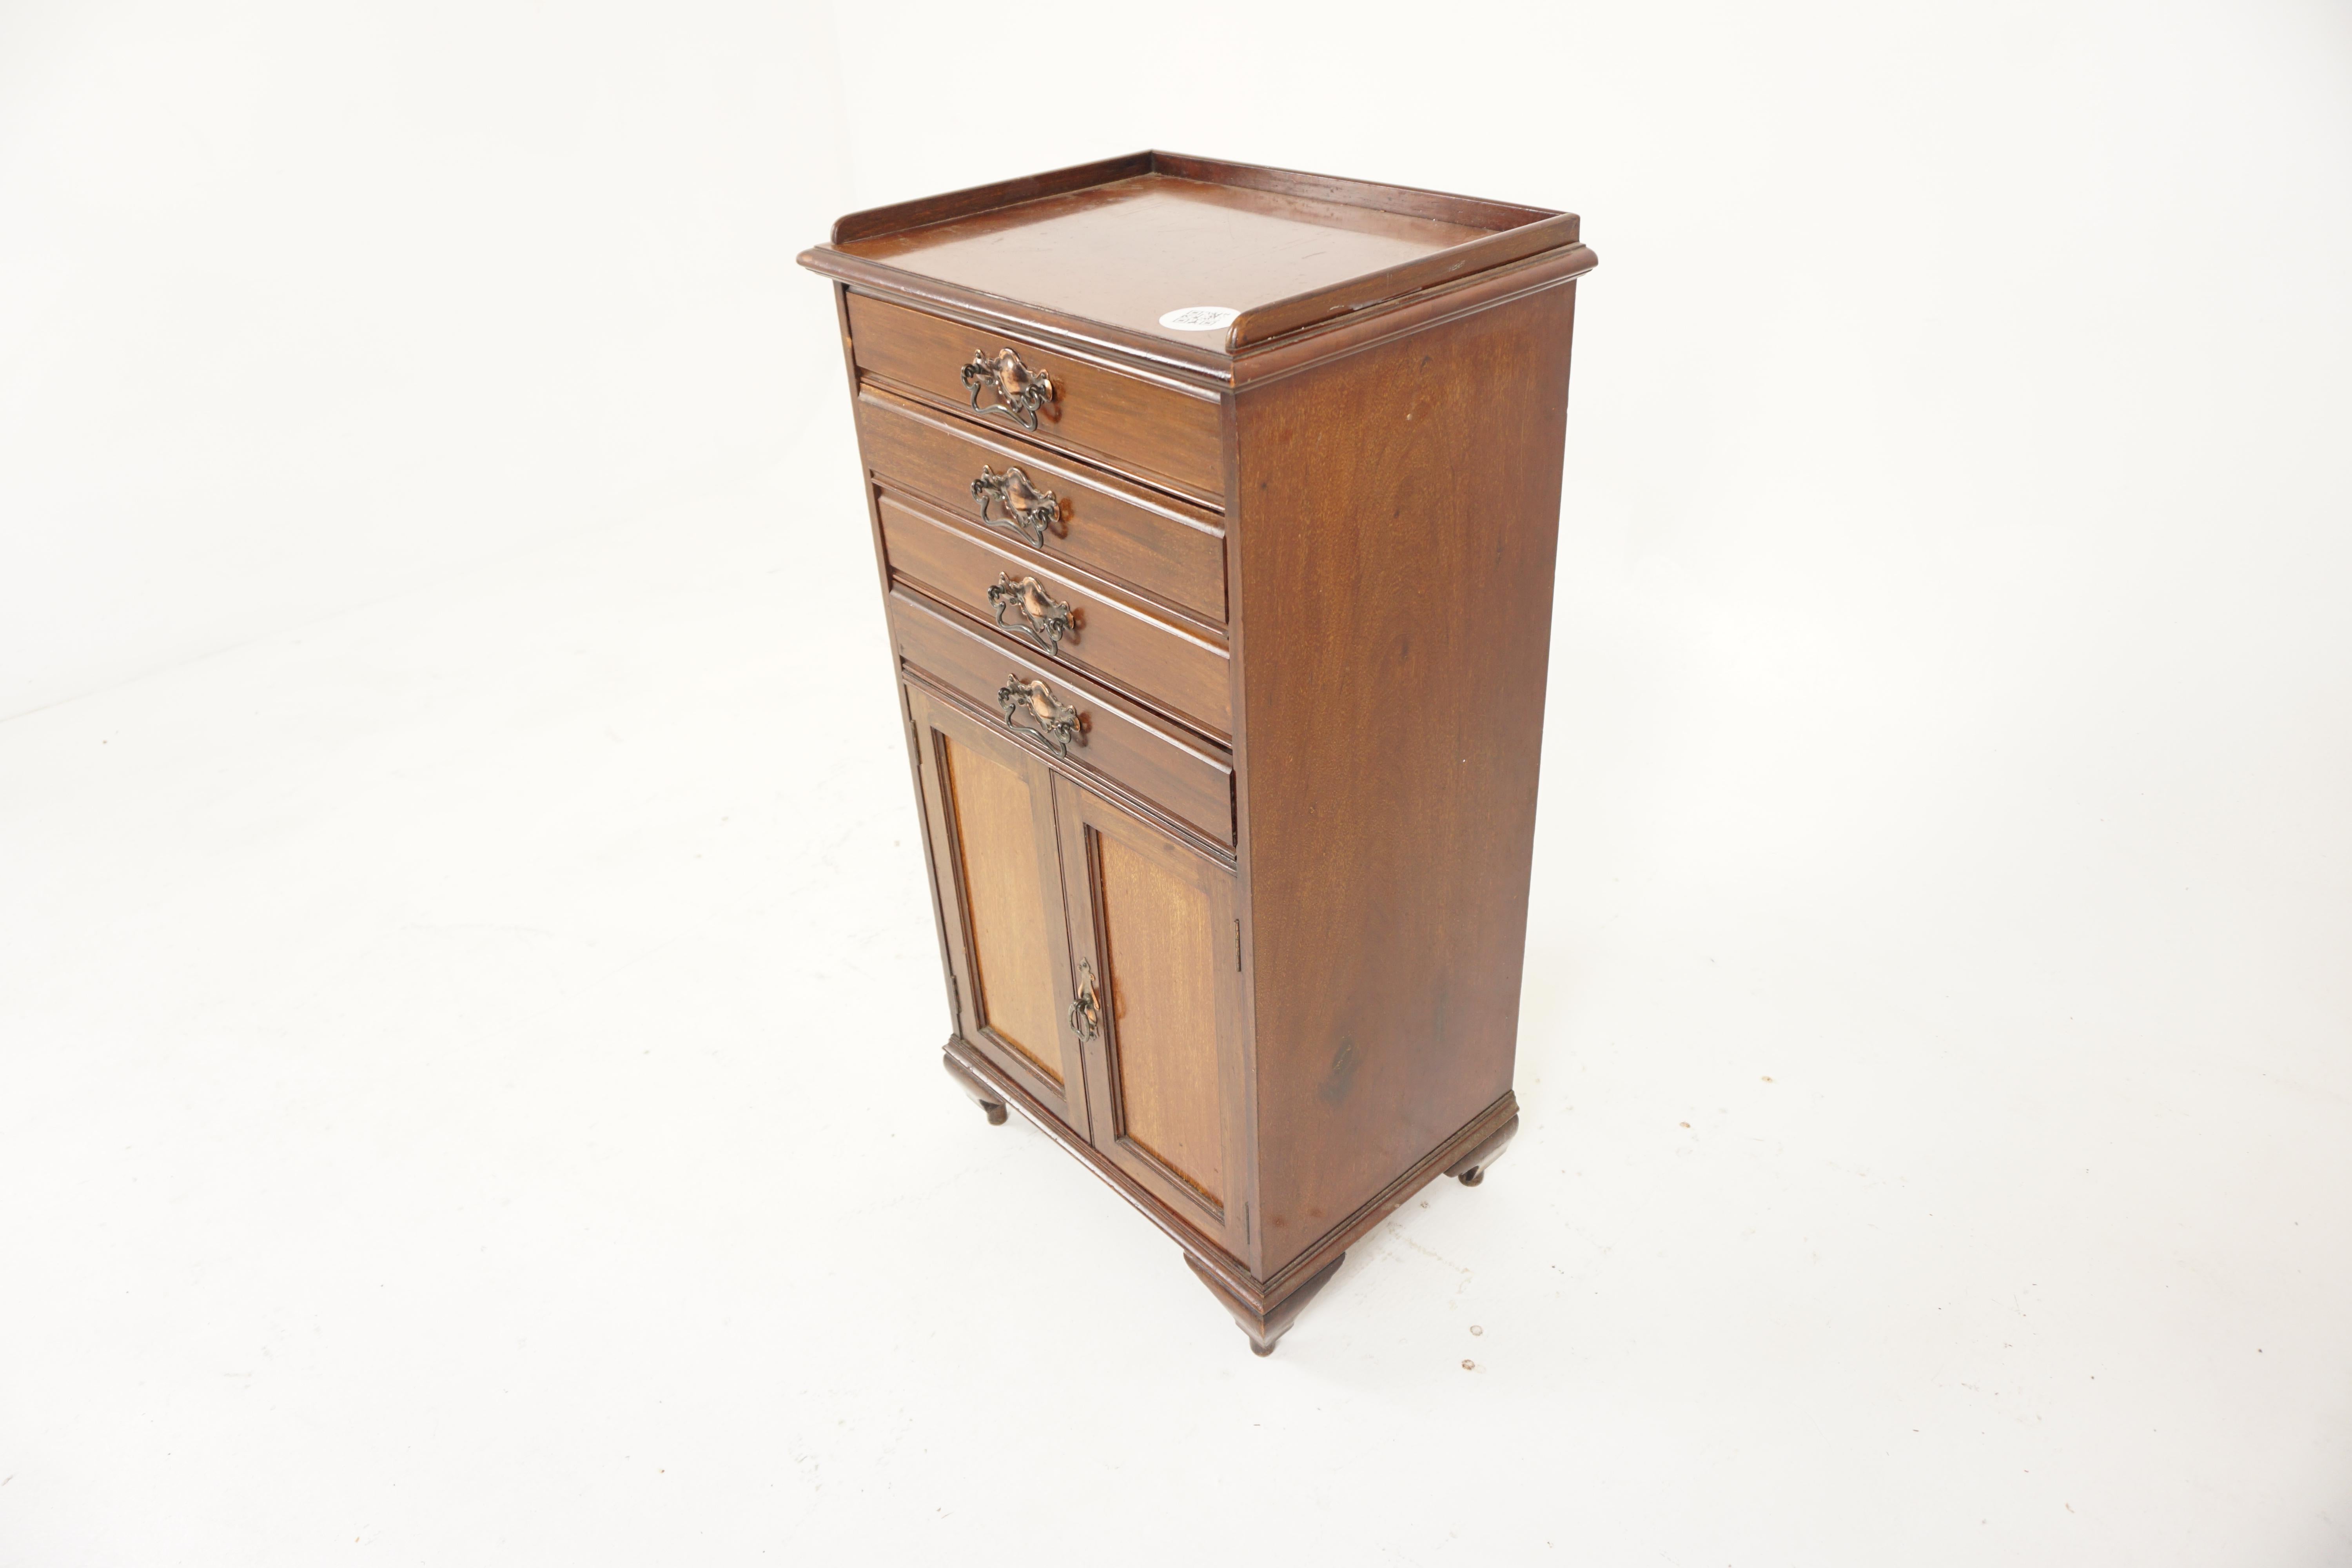 Ant. Victorian walnut sheet music cabinet, file, cabinet, chest of drawers, Scotland 1880, H858

Scotland 1880
Solid Walnut
Original Finish
With a galleried top
It comprises of four drawers which drop down when opened to allow sheet music